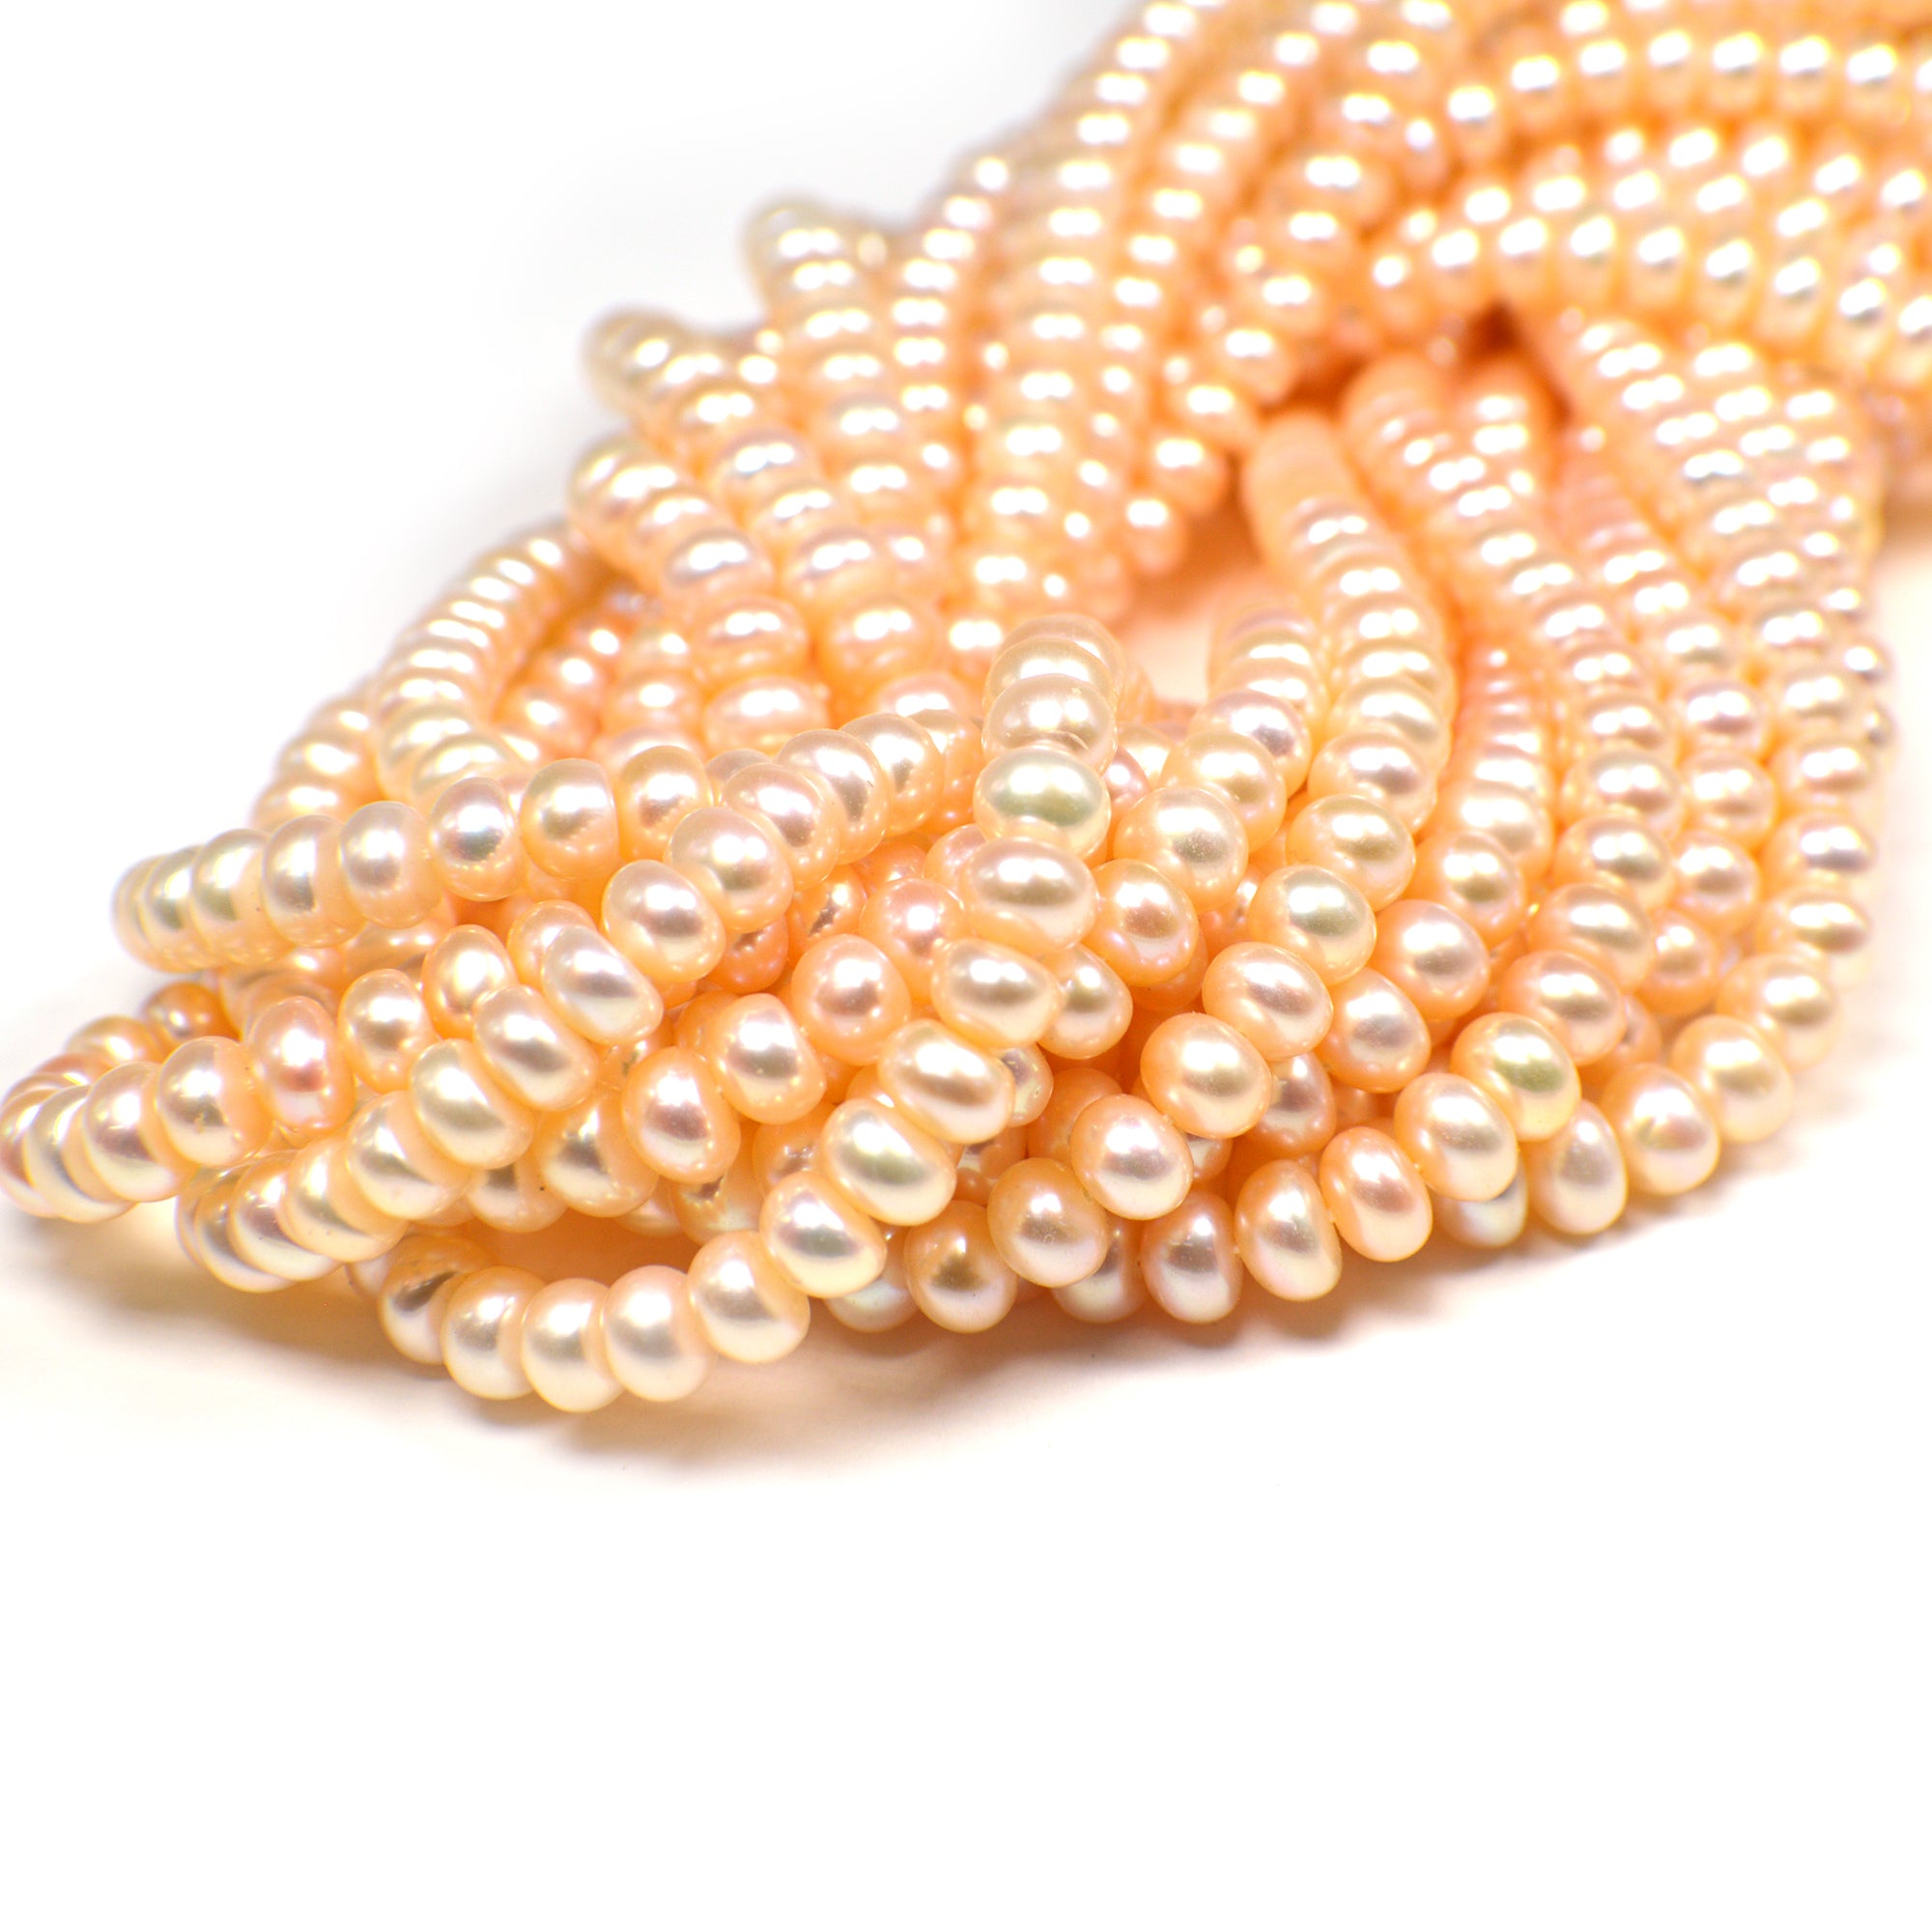 5 - 6 MM Peach Button / Rondelle Freshwater Pearls Beads